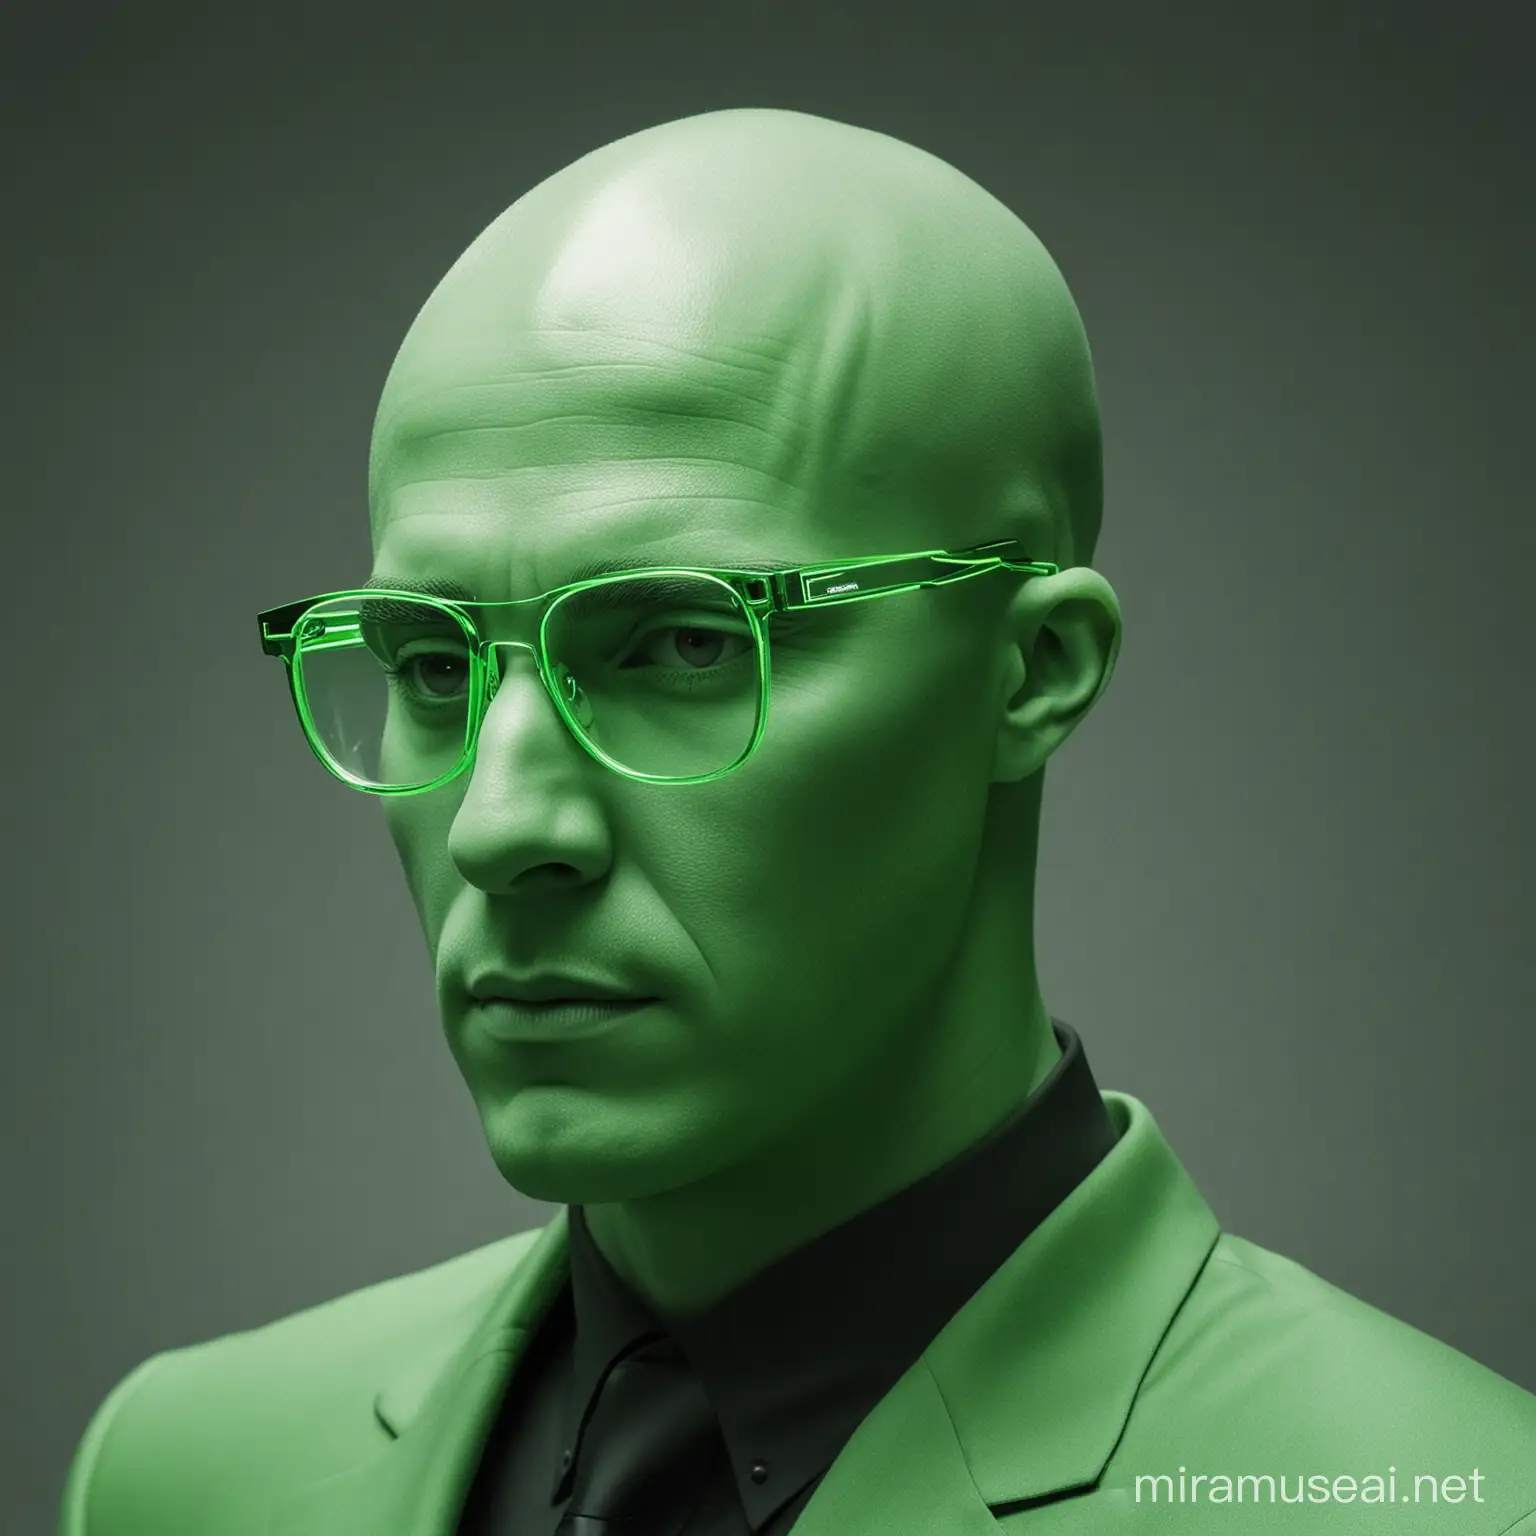 Created a man bald head with glasses in sharp lines and monochromatic shades meet neon green, depicting the fusion of technology and consciousness.